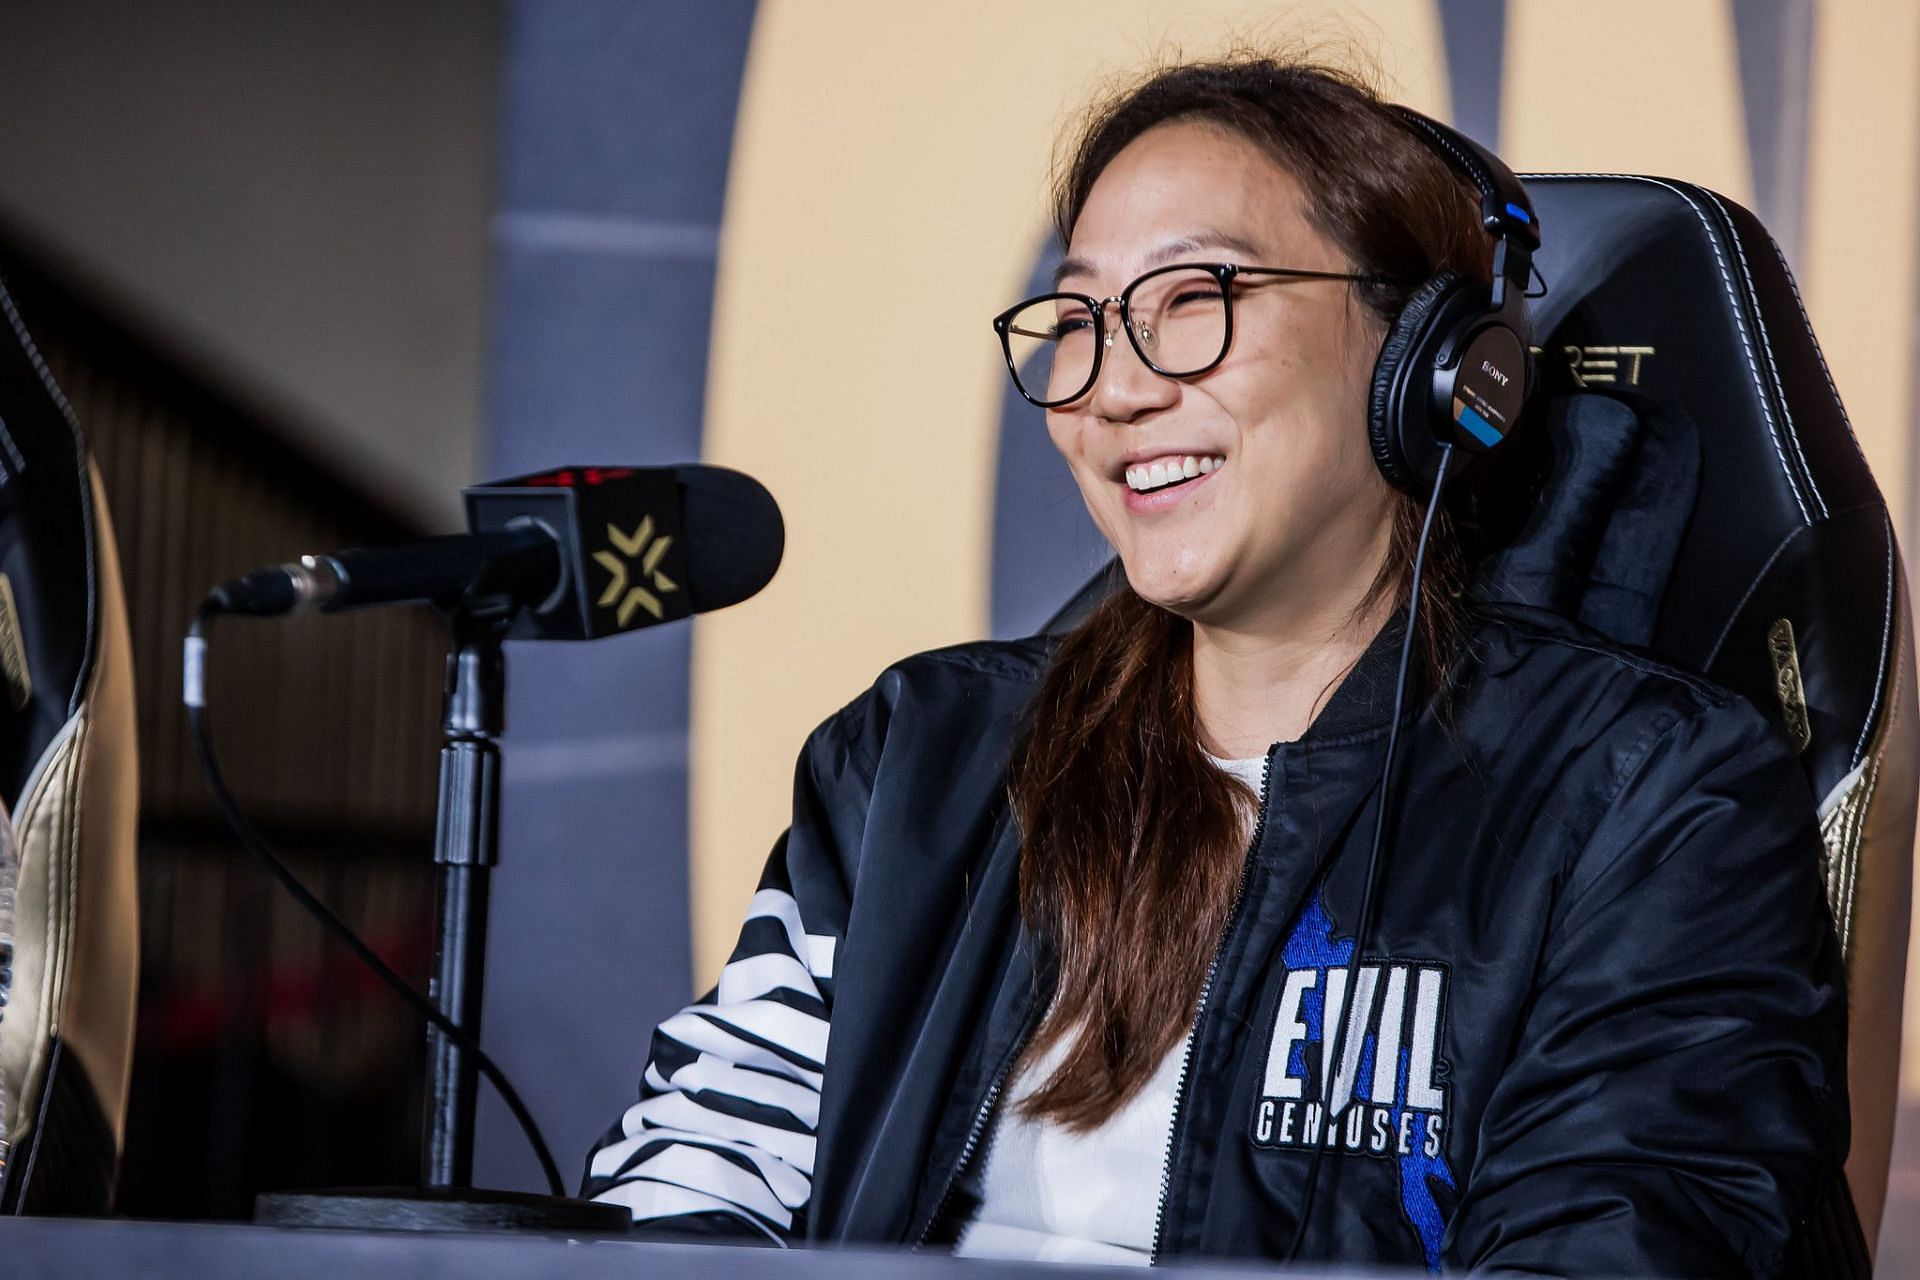 Potter at the pre-event press conference (image via Riot Games)